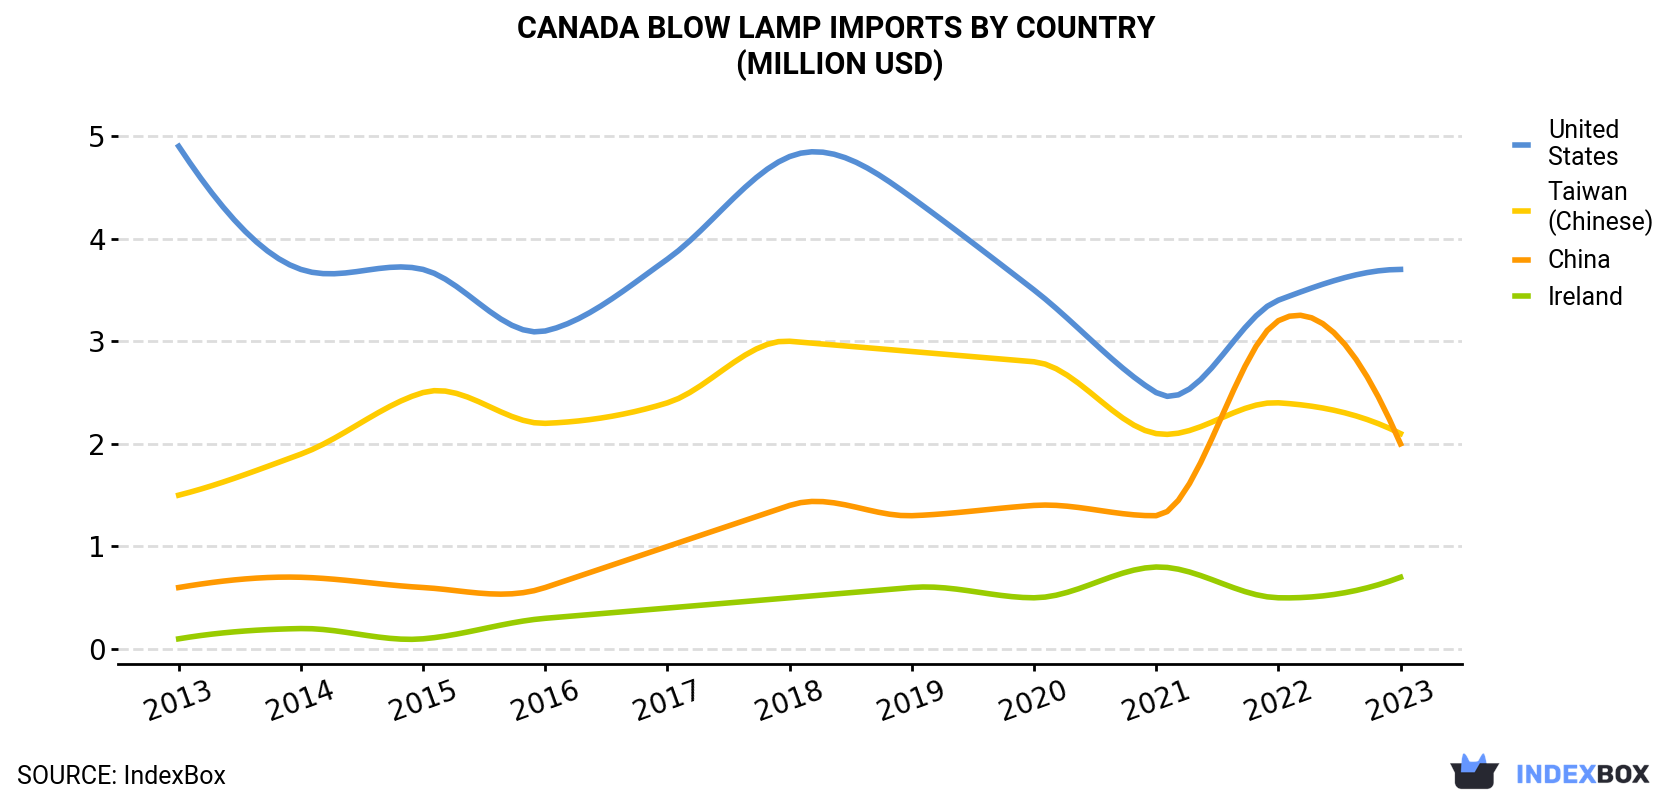 Canada Blow Lamp Imports By Country (Million USD)